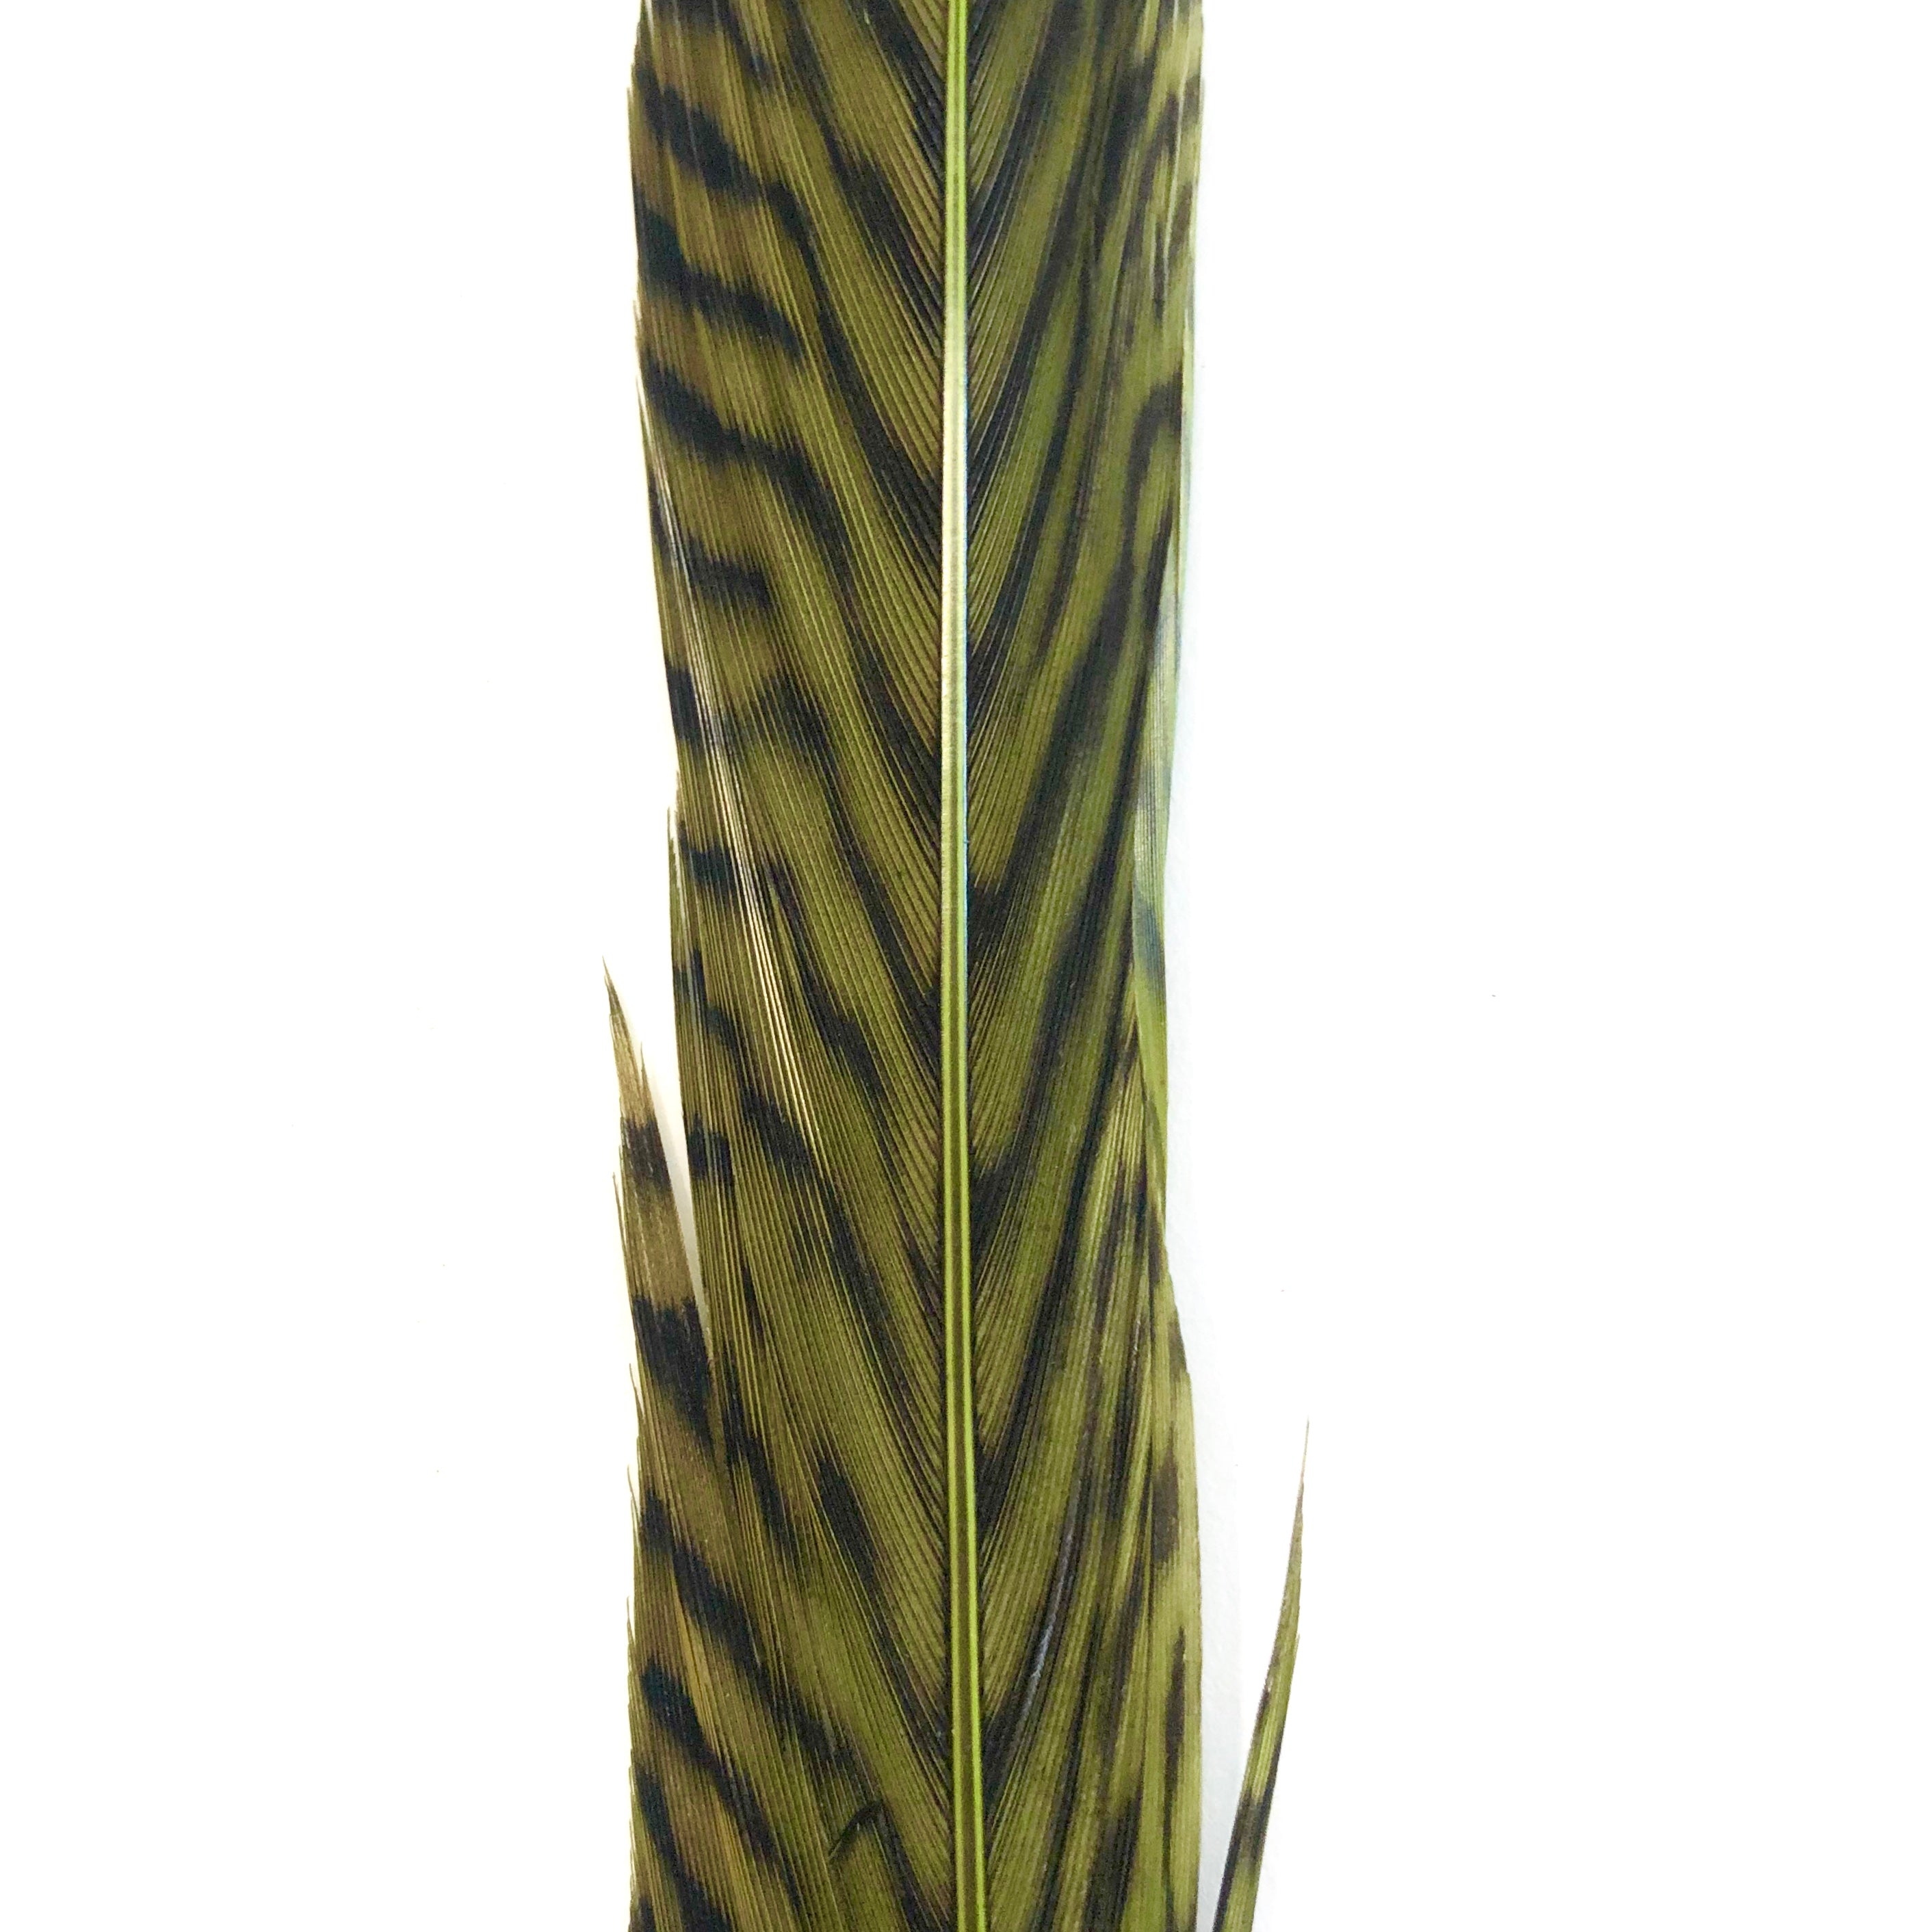 10" to 20" Golden Pheasant Side Tail Feather - Olive Green